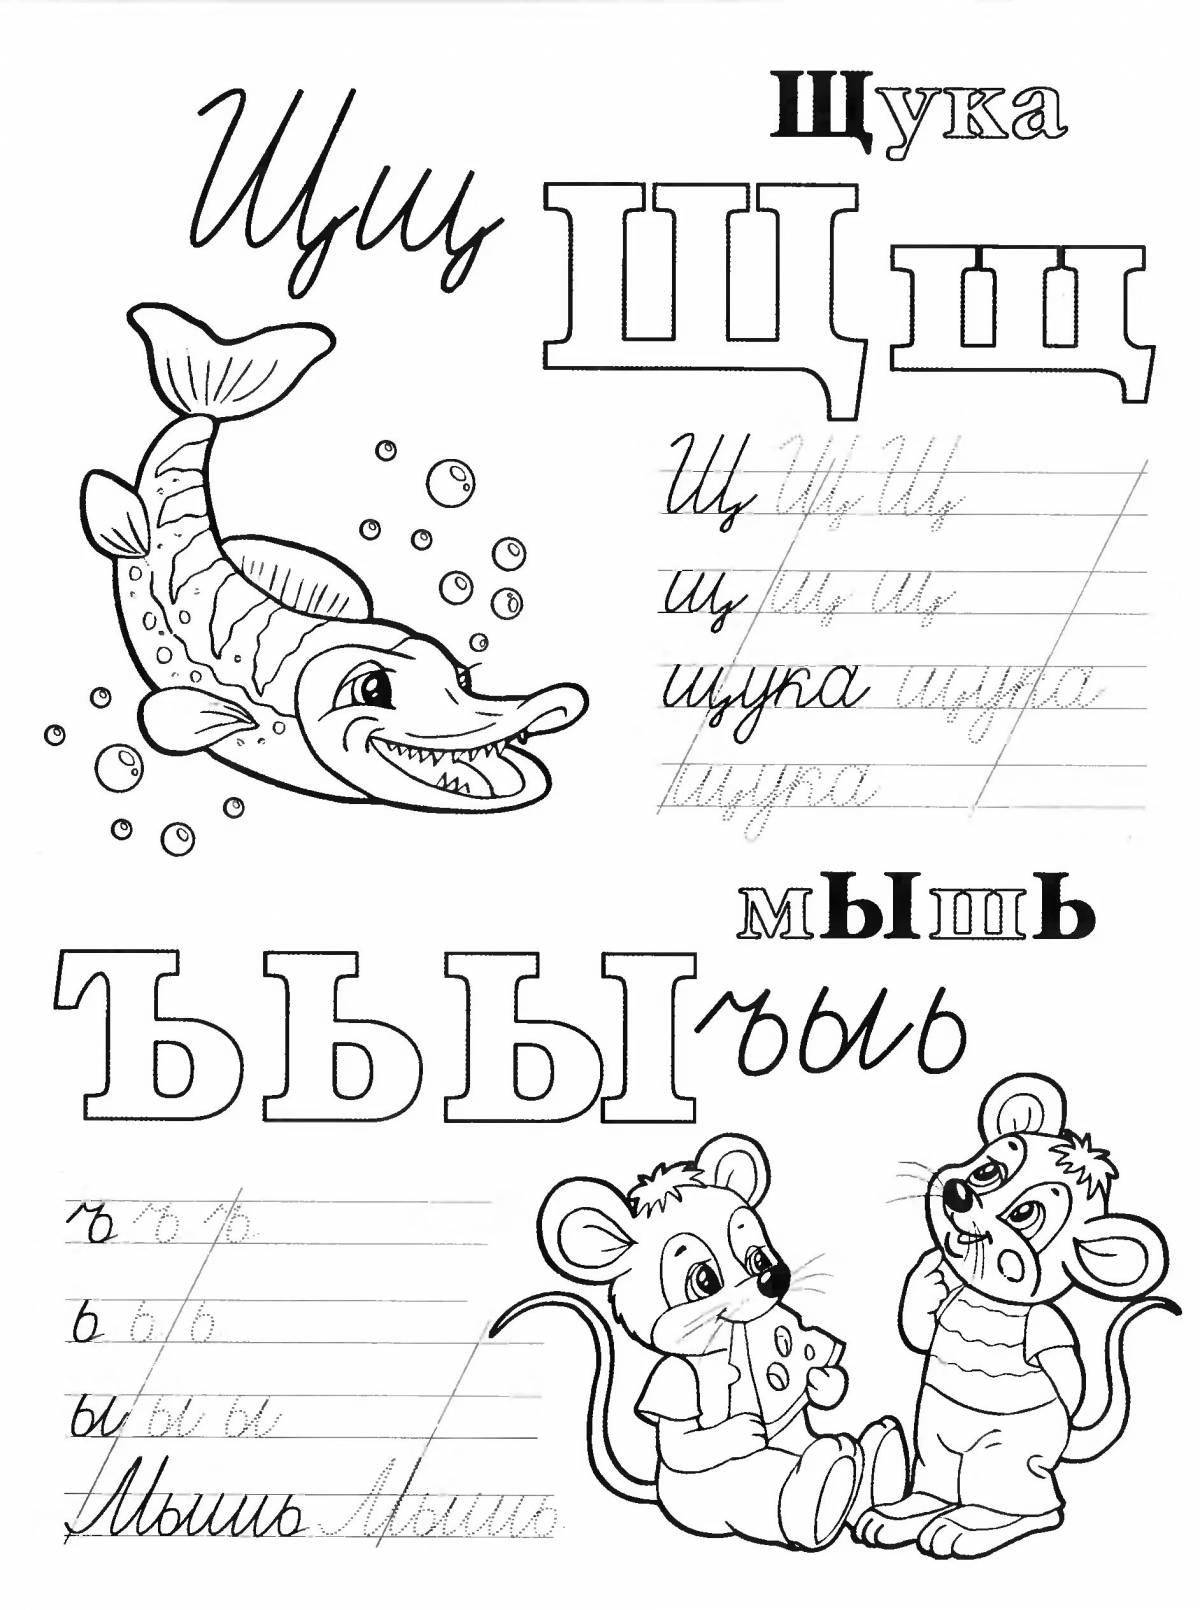 Colored alphabet coloring page